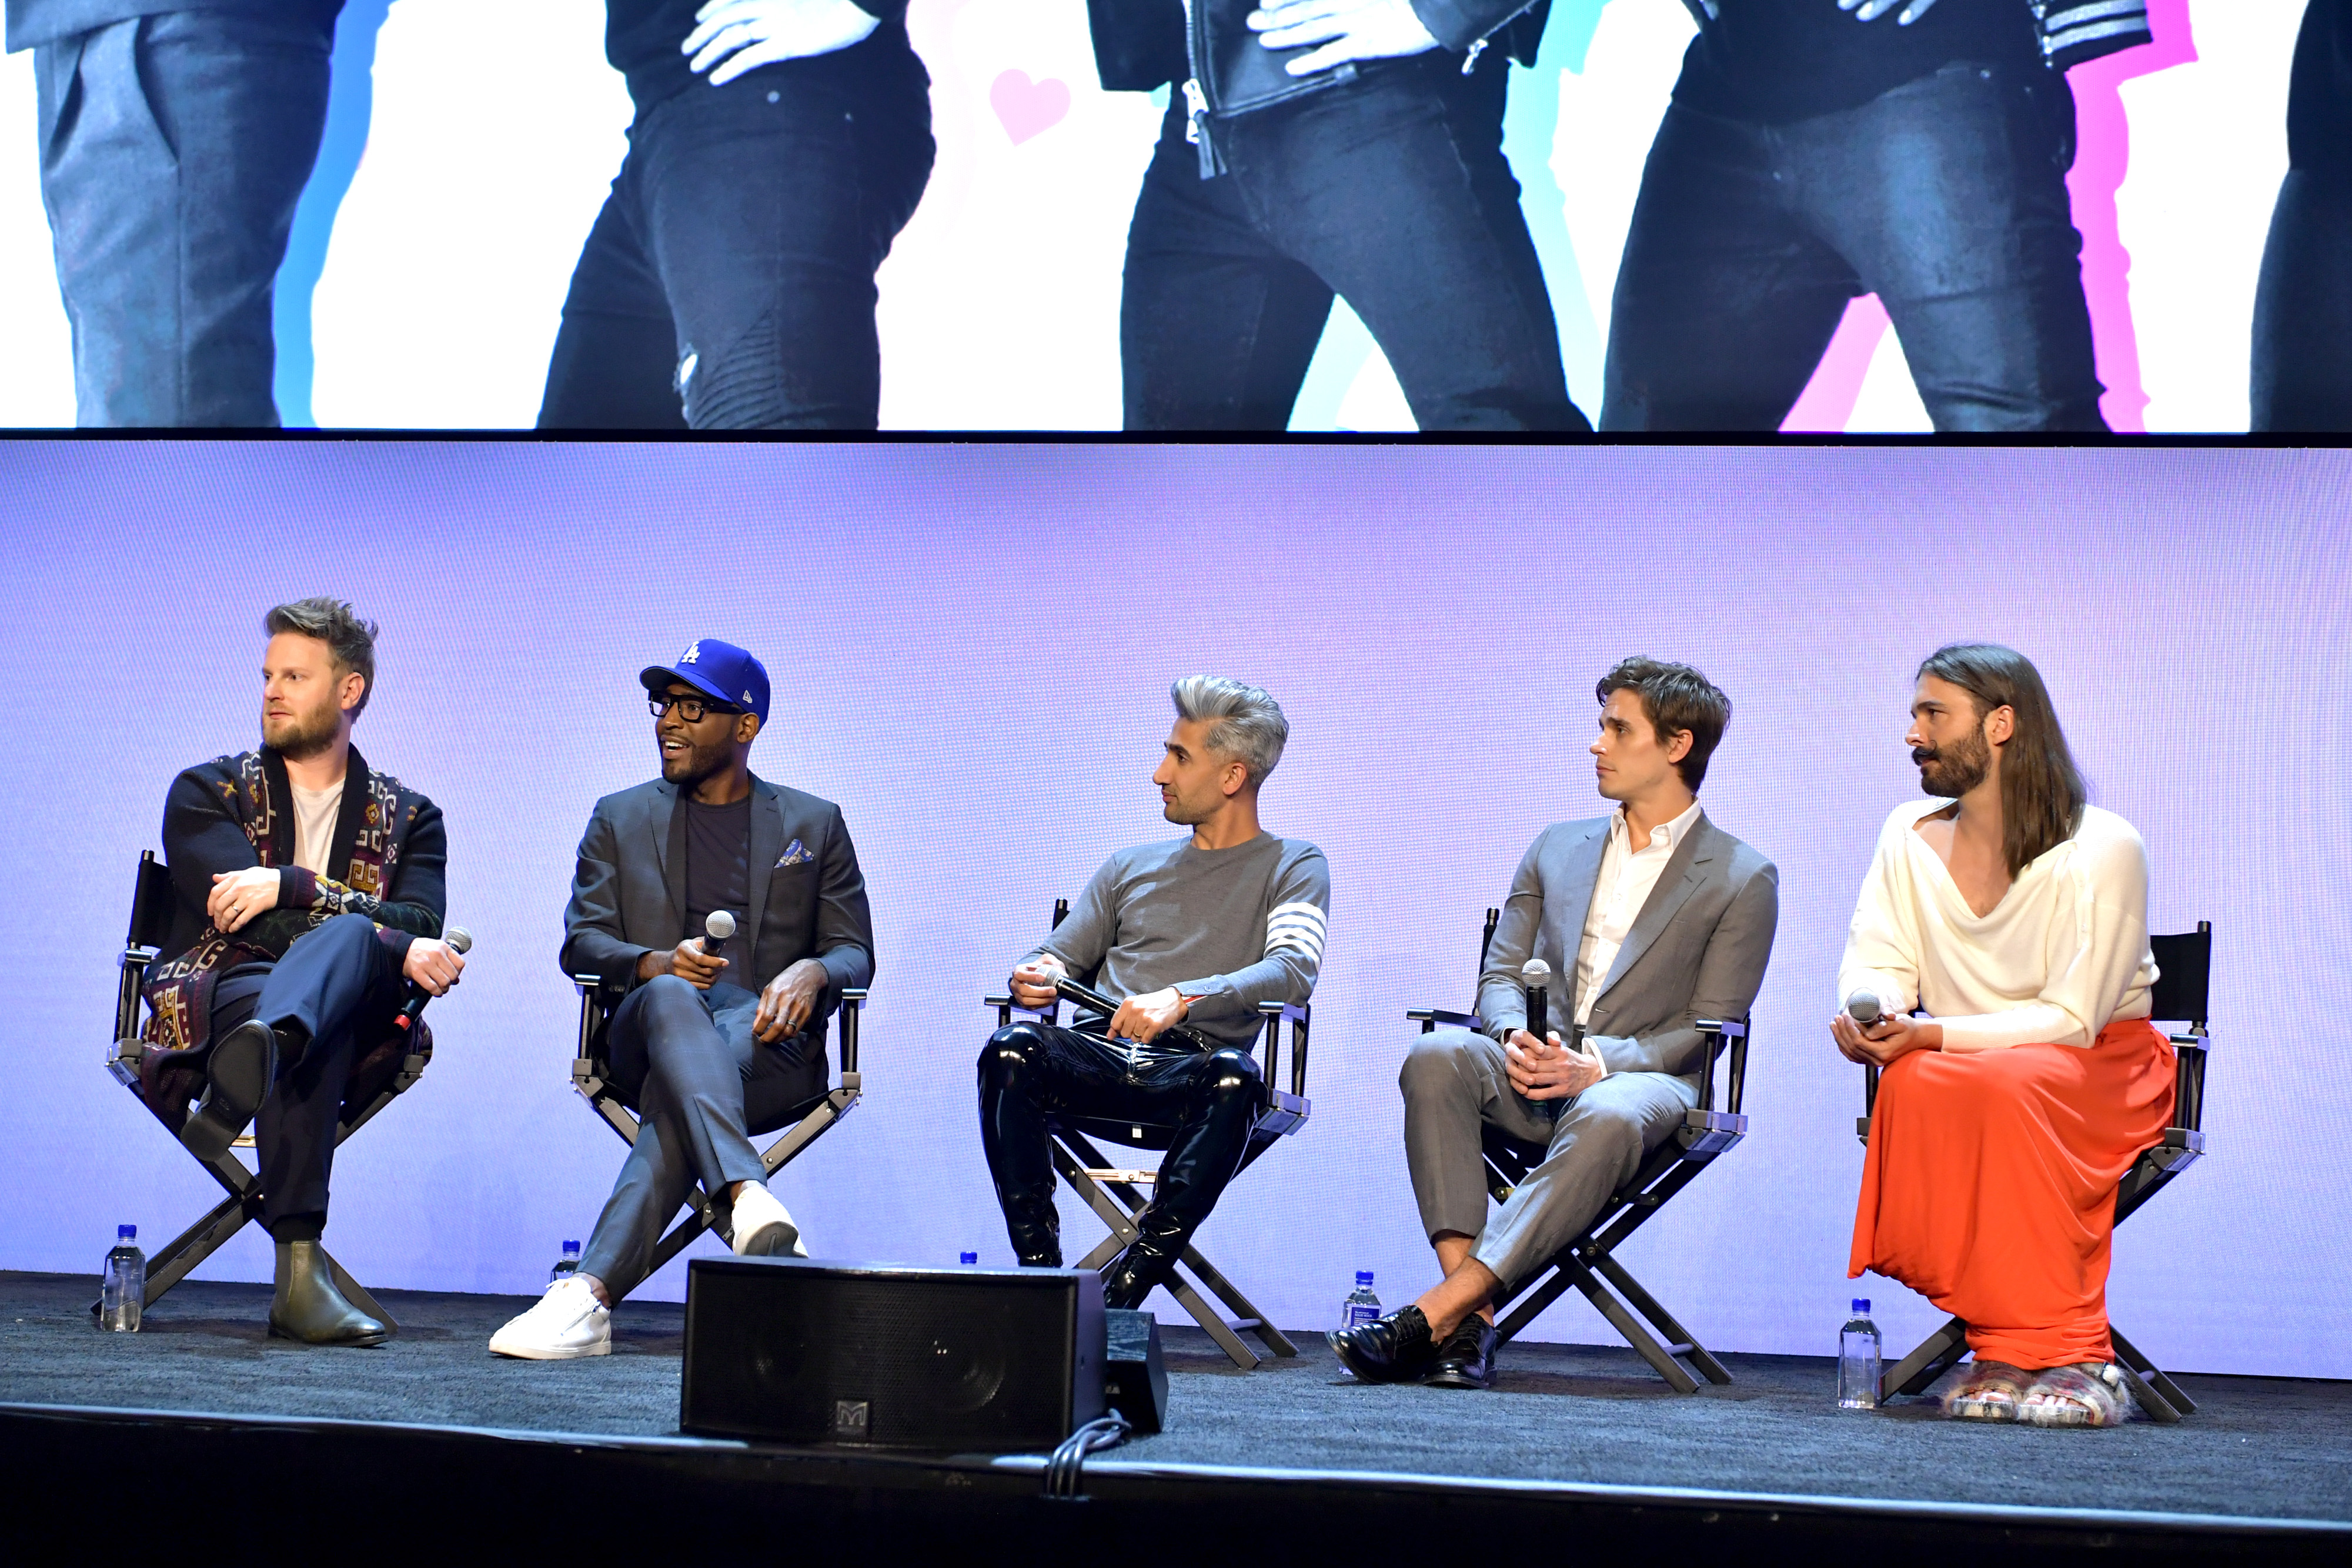 Bobby Berk, Karamo Brown, Tan France, Antoni Porowski, and Jonathan Van Ness speak on stage during the Netflix FYSEE 'Queer Eye' panel, the fab five sitting together on stage